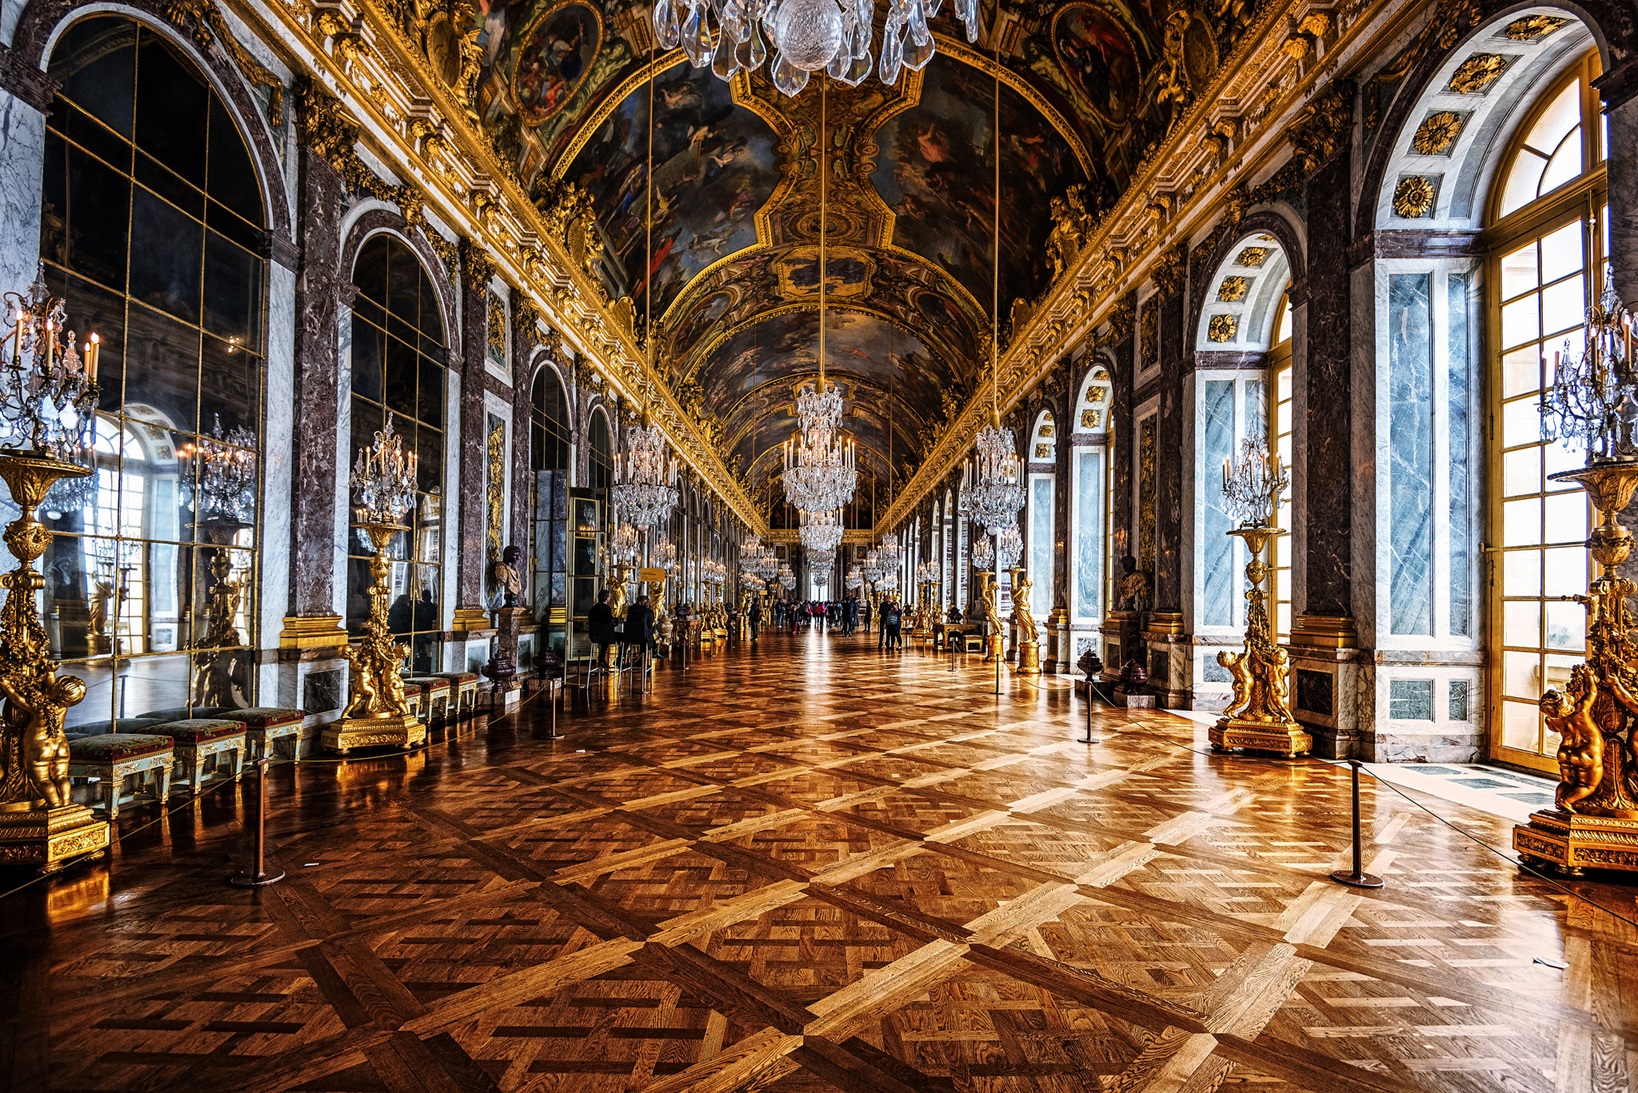 <p>The Chateau de Versailles has a rich history that <strong>dates </strong><strong>back to 1661</strong>. It was a reflection of the politics of the time and the way King Louix XIV ruled—and its extravagance and beauty is its biggest selling point. The Hall of Mirrors is one of the most anticipated parts of the palace.</p>